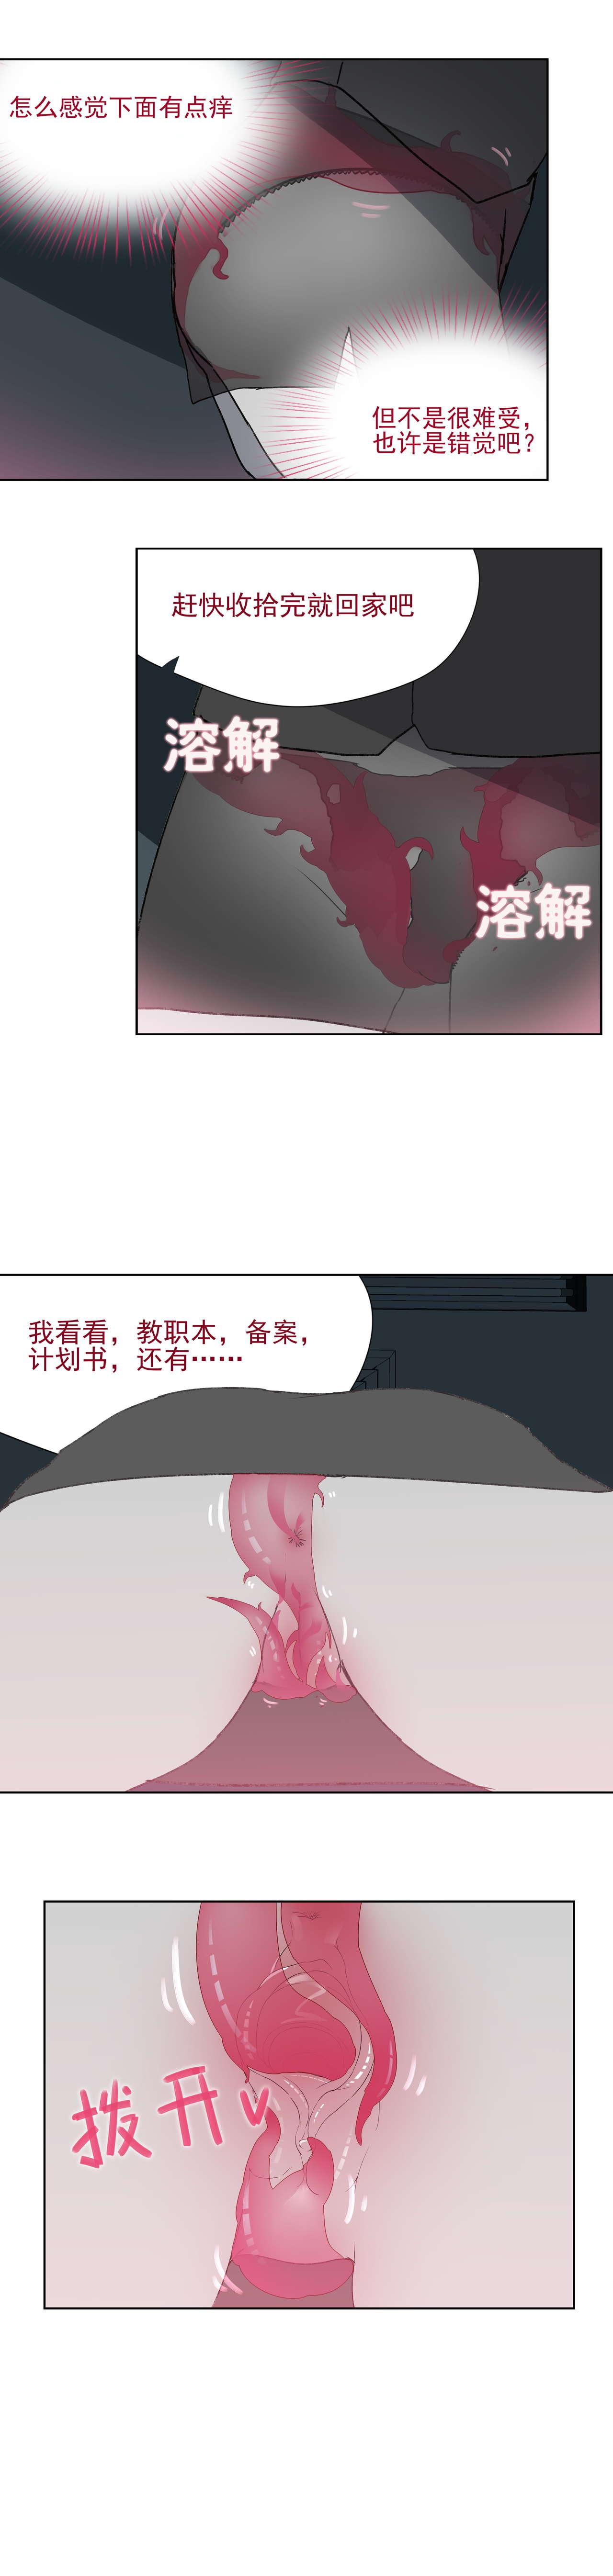 Camwhore 寄生之恋 Tentacle love - Original Exhibitionist - Page 5